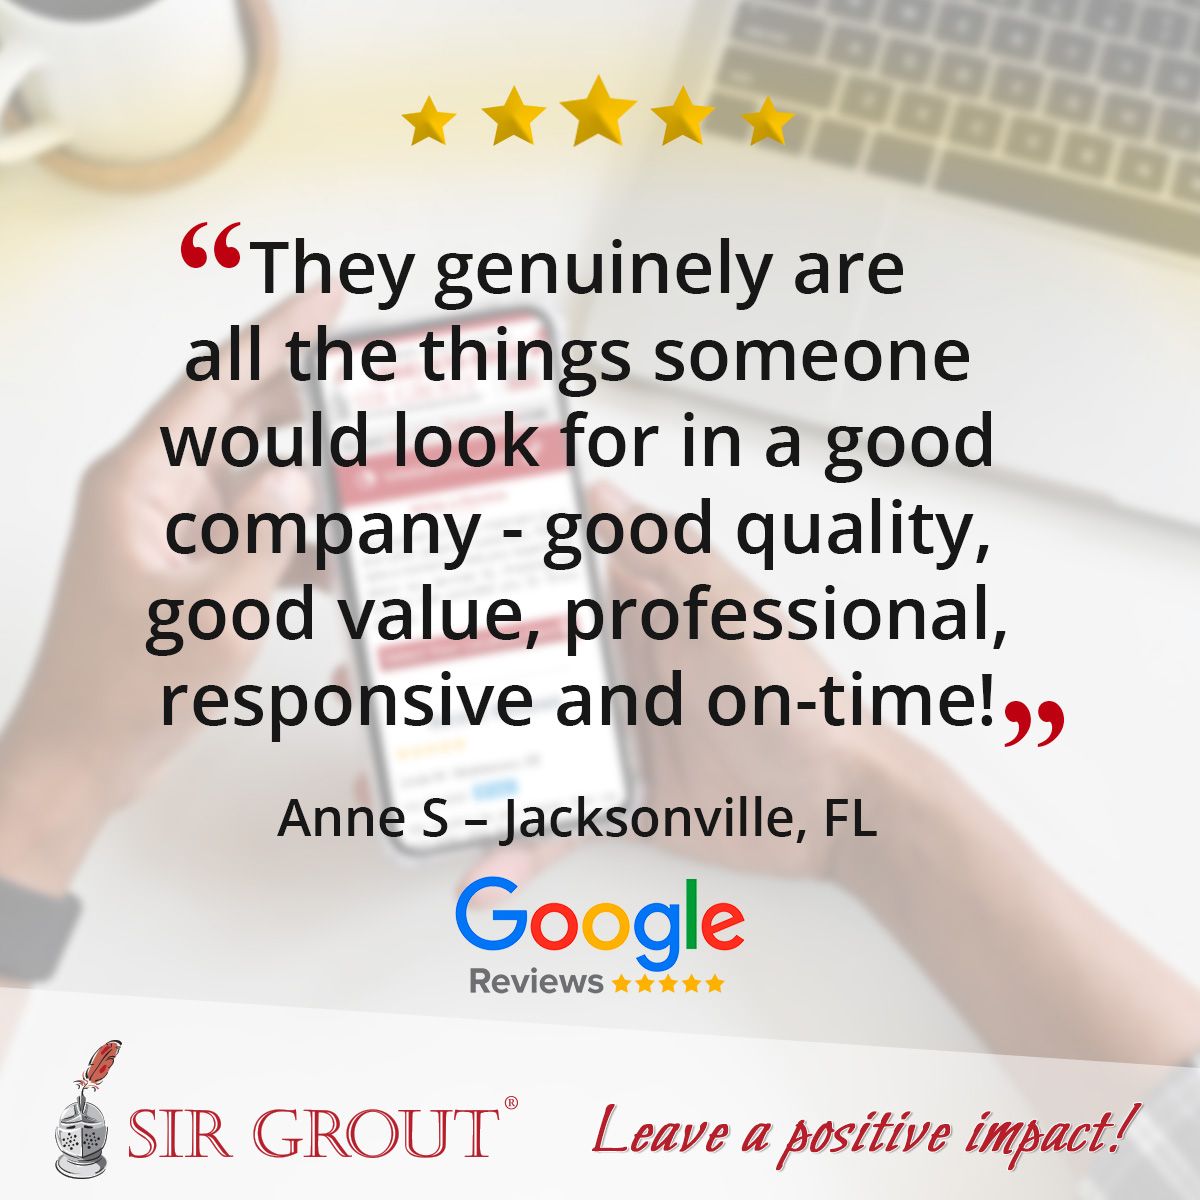 They genuinely are all the things someone would look for in a good company - good quality, good value, professional, responsive and on-time!